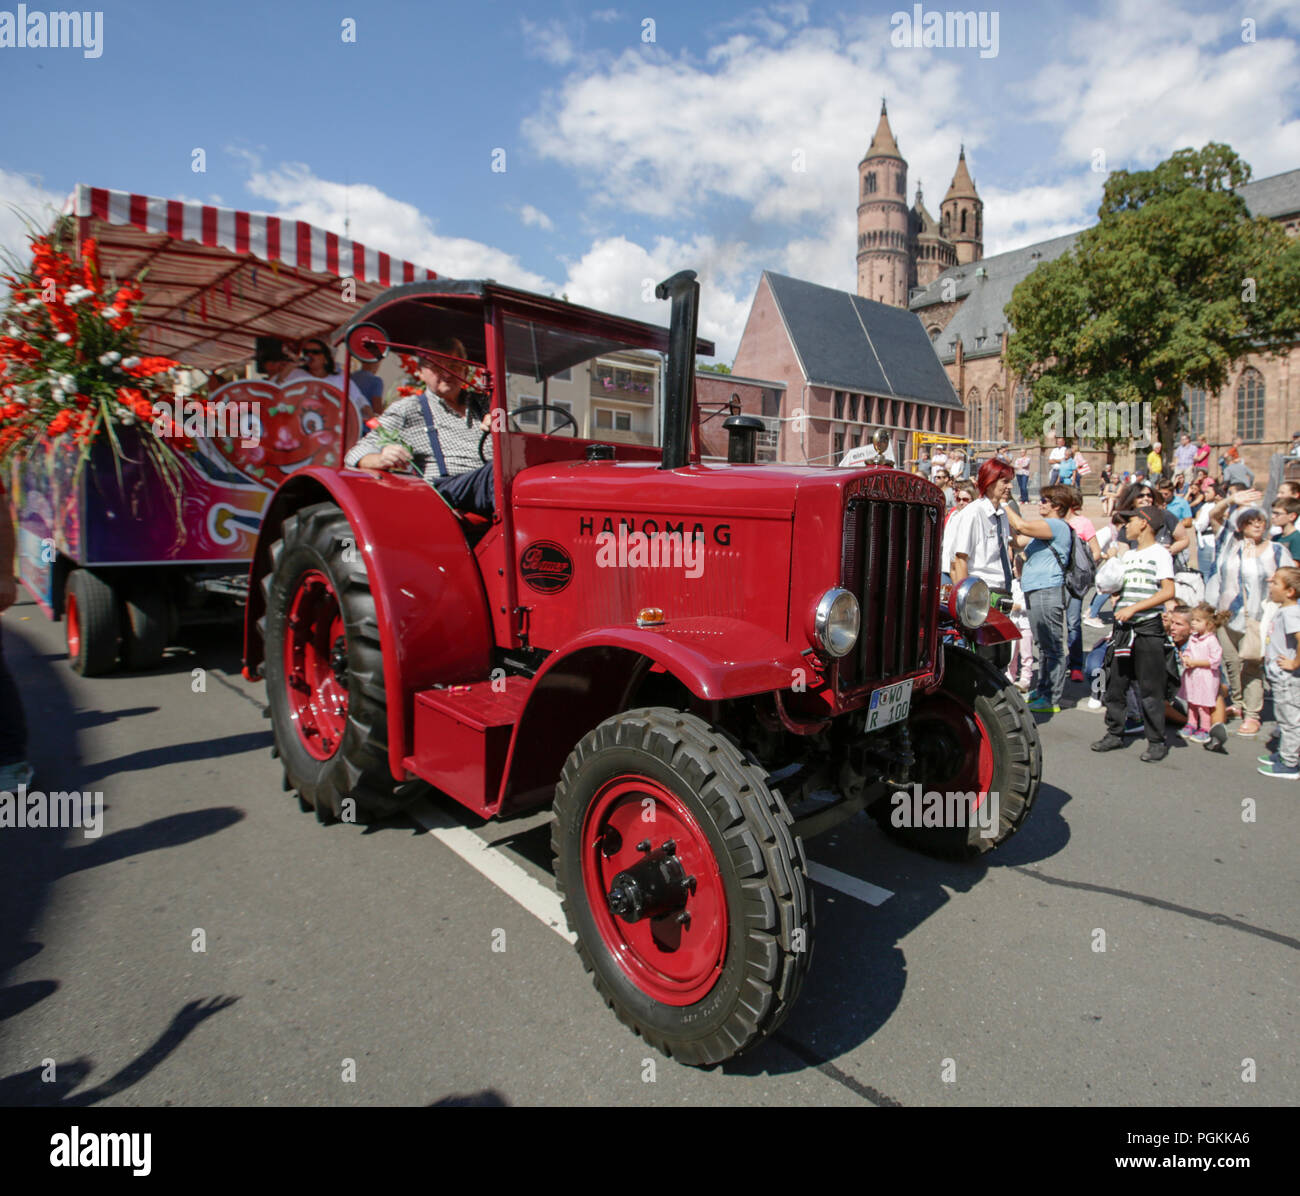 Worms, Germany. 26th Aug, 2018. A vintage Hanomag tractor pulls a float in the parade. The first highlight of the 2018 Backfischfest was the big parade through the city of Worms with over 70 groups and floats. Community groups, music groups and businesses from Worms and further afield took part. Credit: Michael Debets/Pacific Press/Alamy Live News Stock Photo